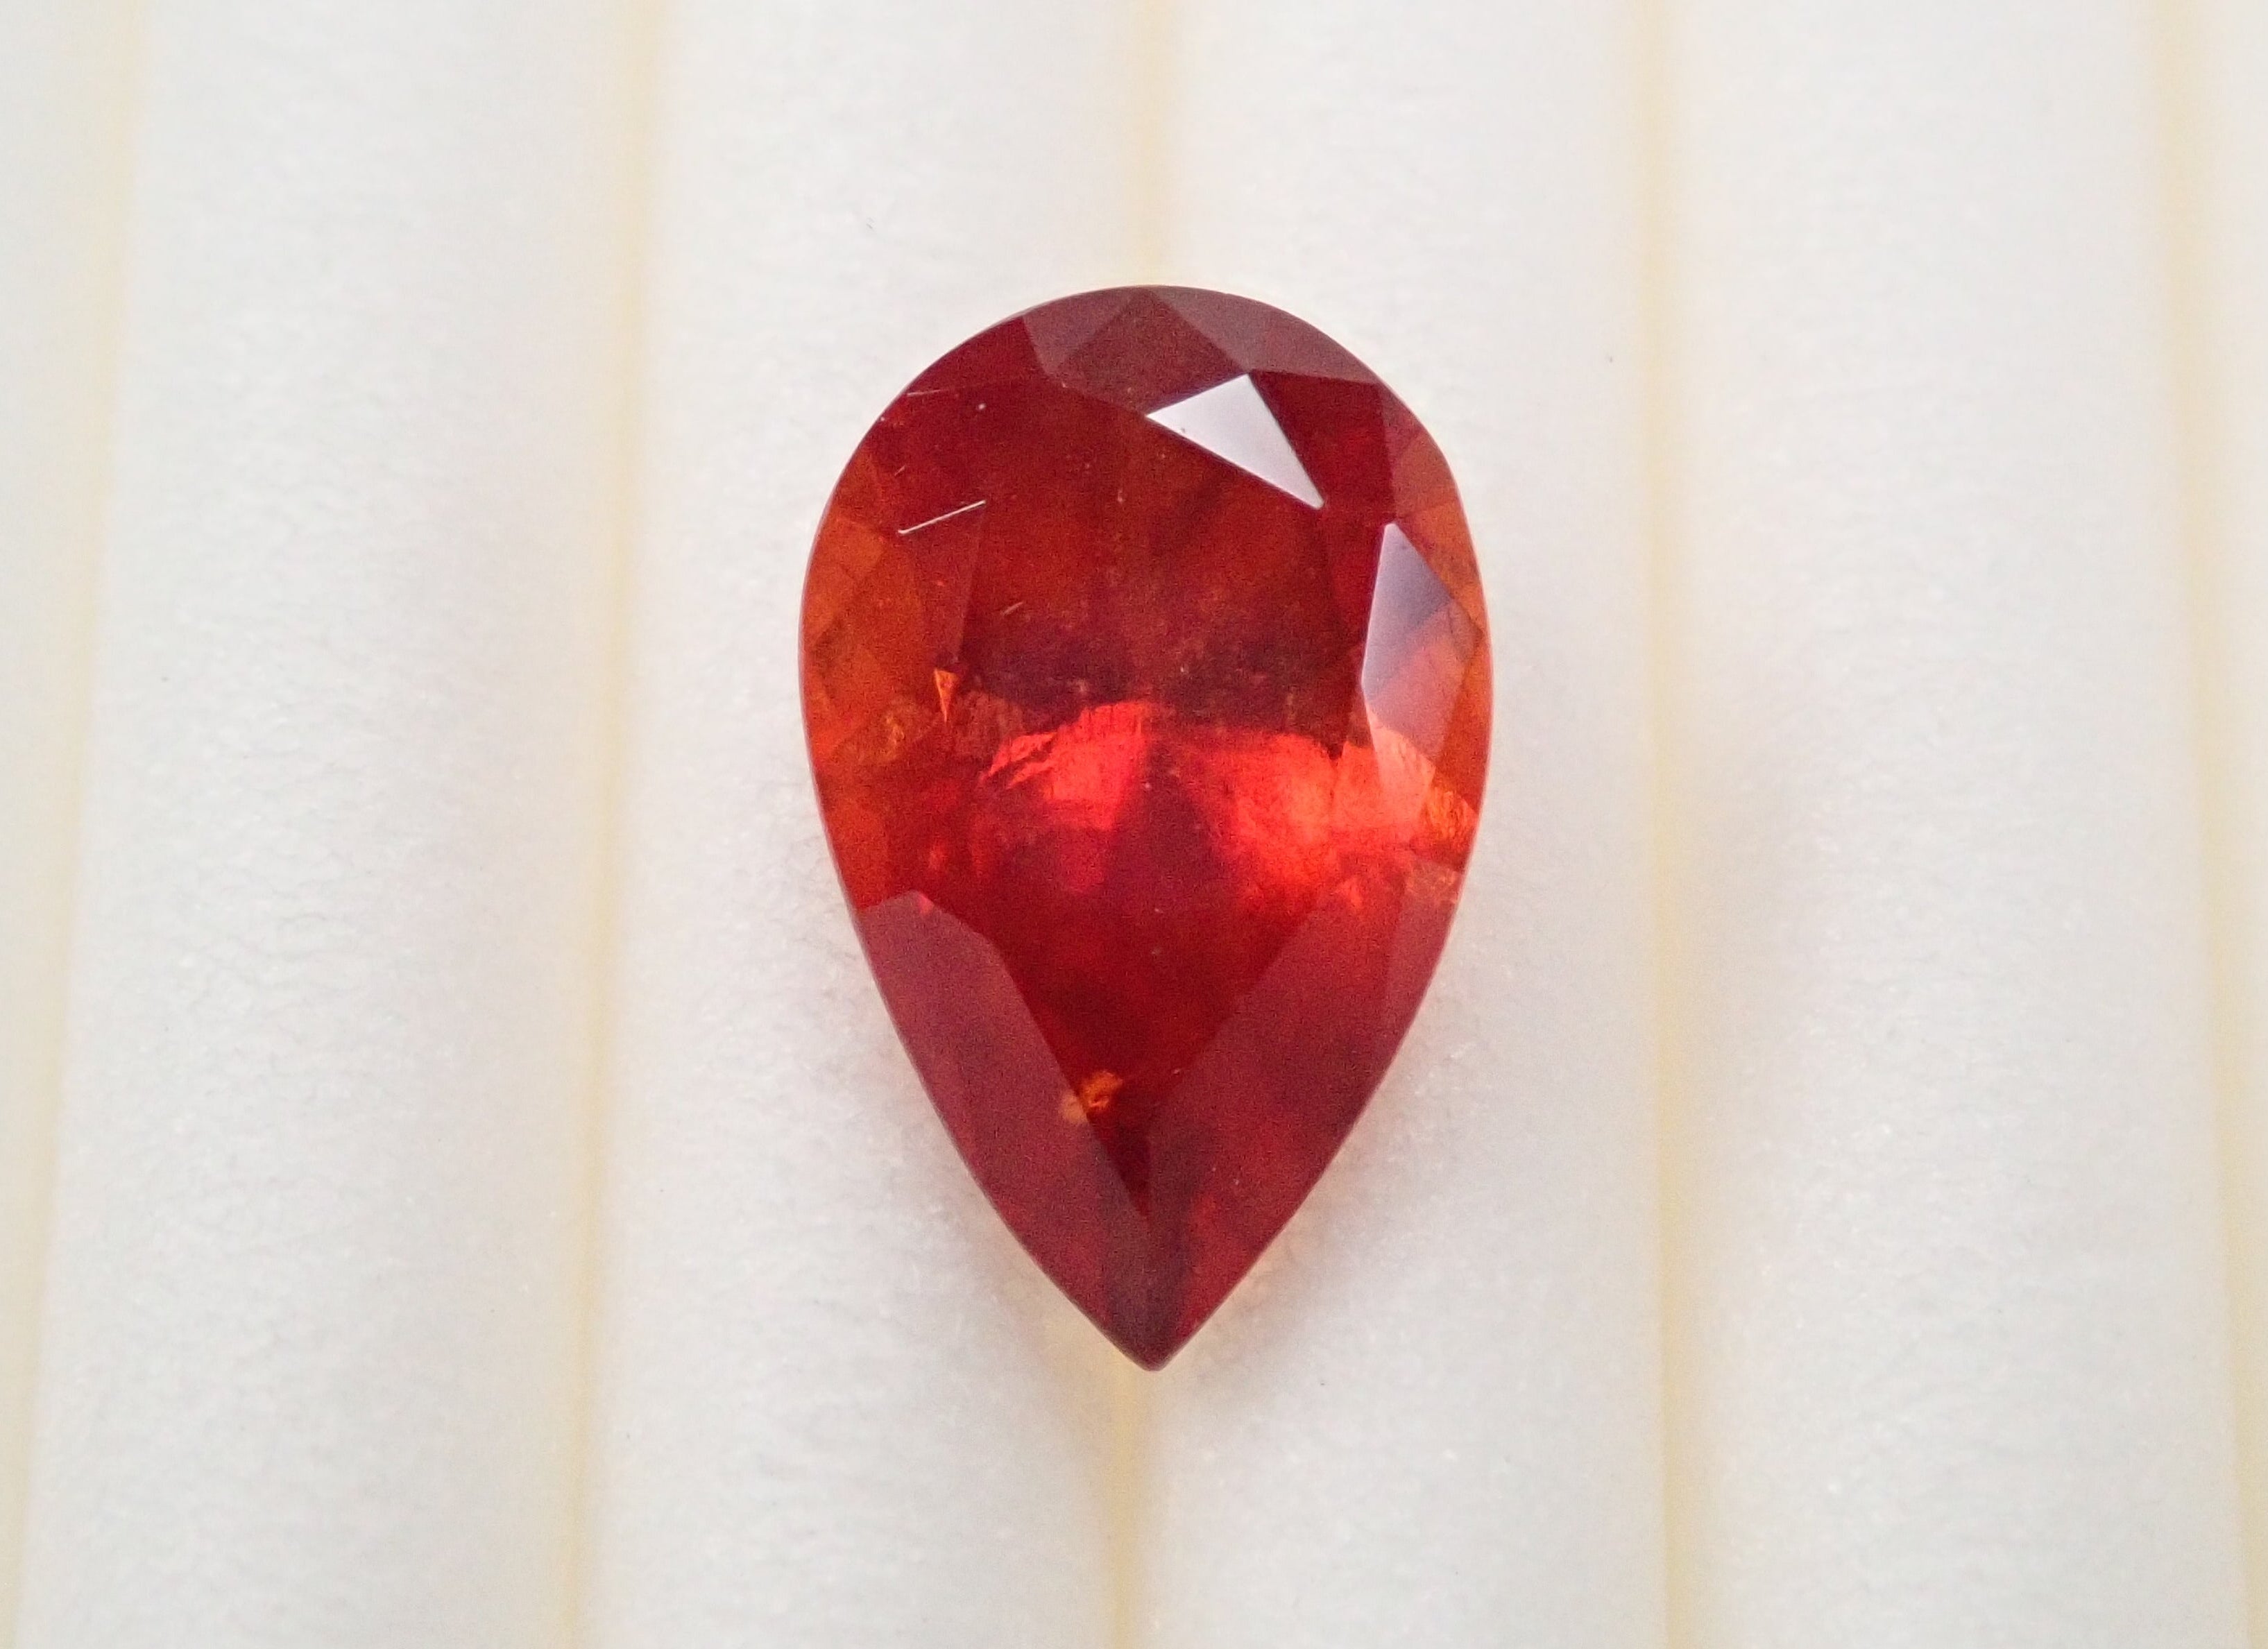 [12554328] 0.939ct Rhodochrosite loose stone from South Africa